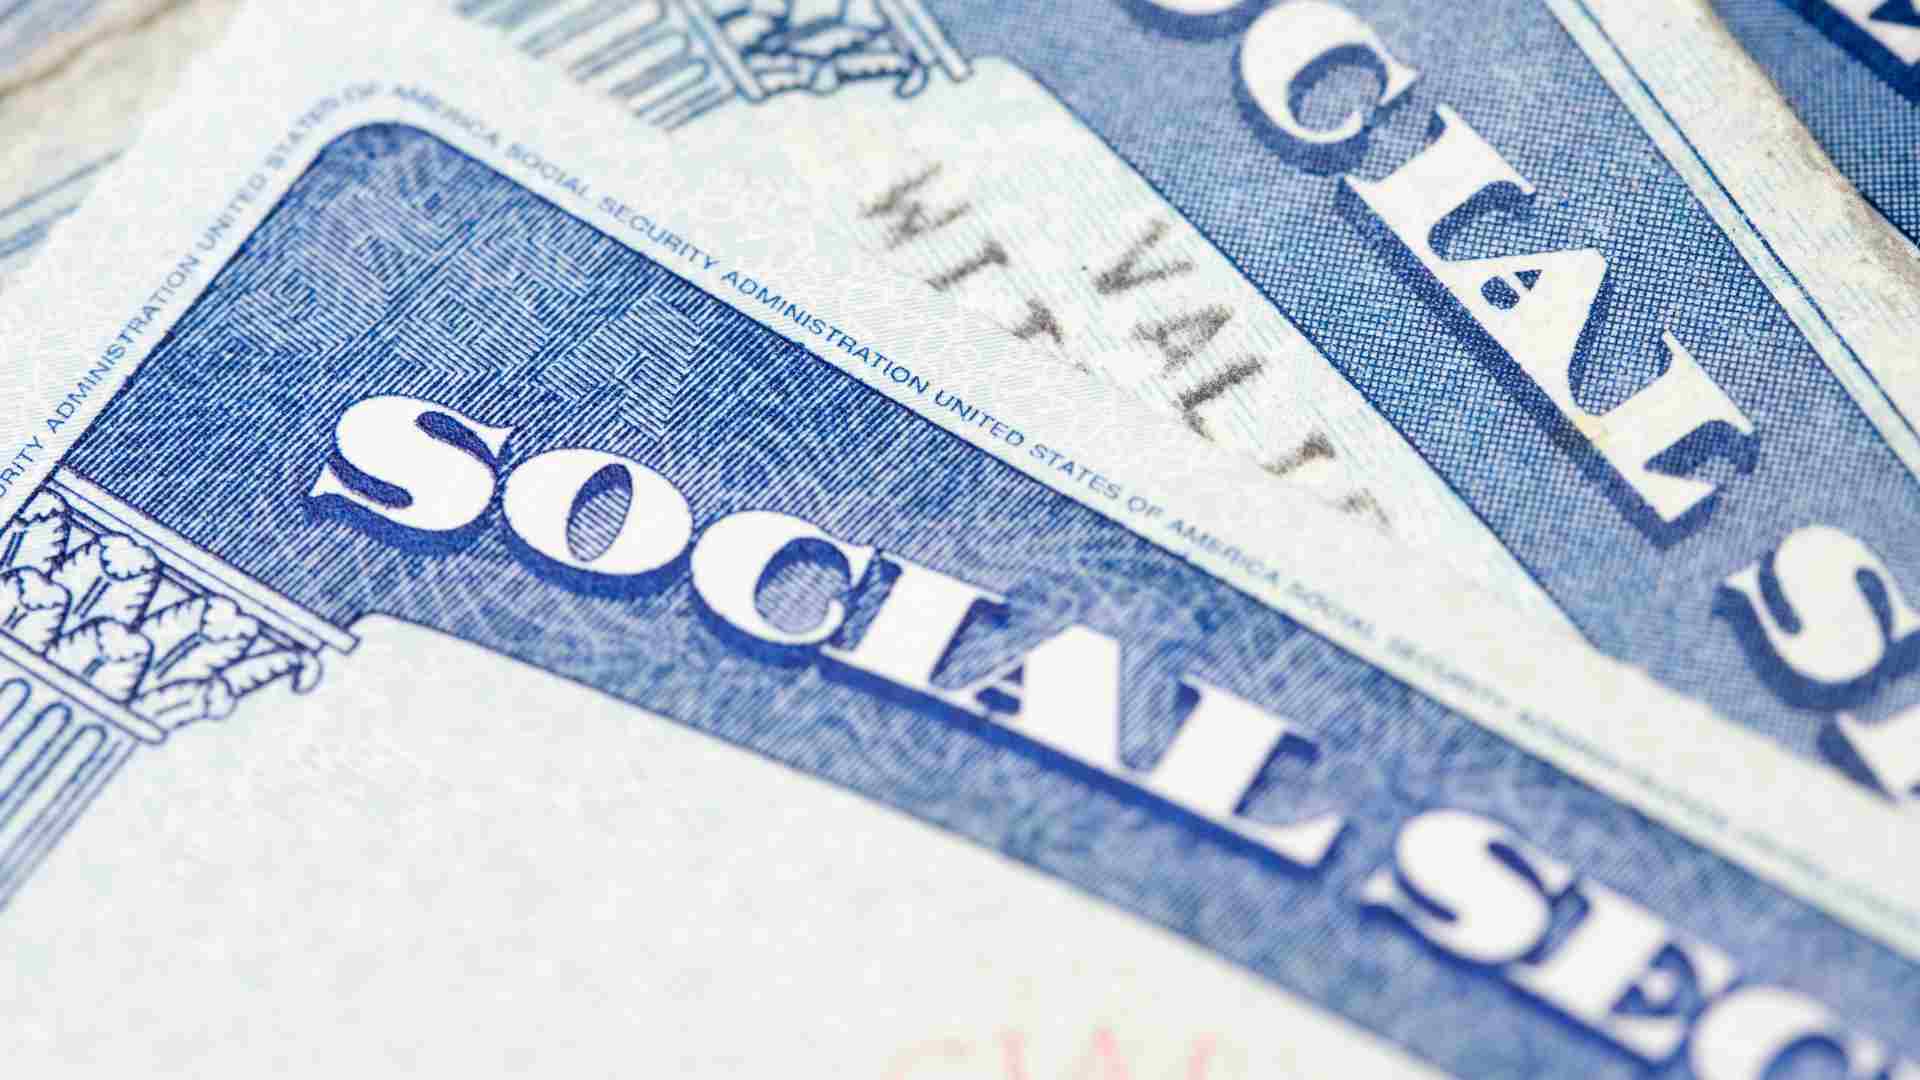 Seniors and citizens on disability benefits will receive their first January payments with a Social Security increase